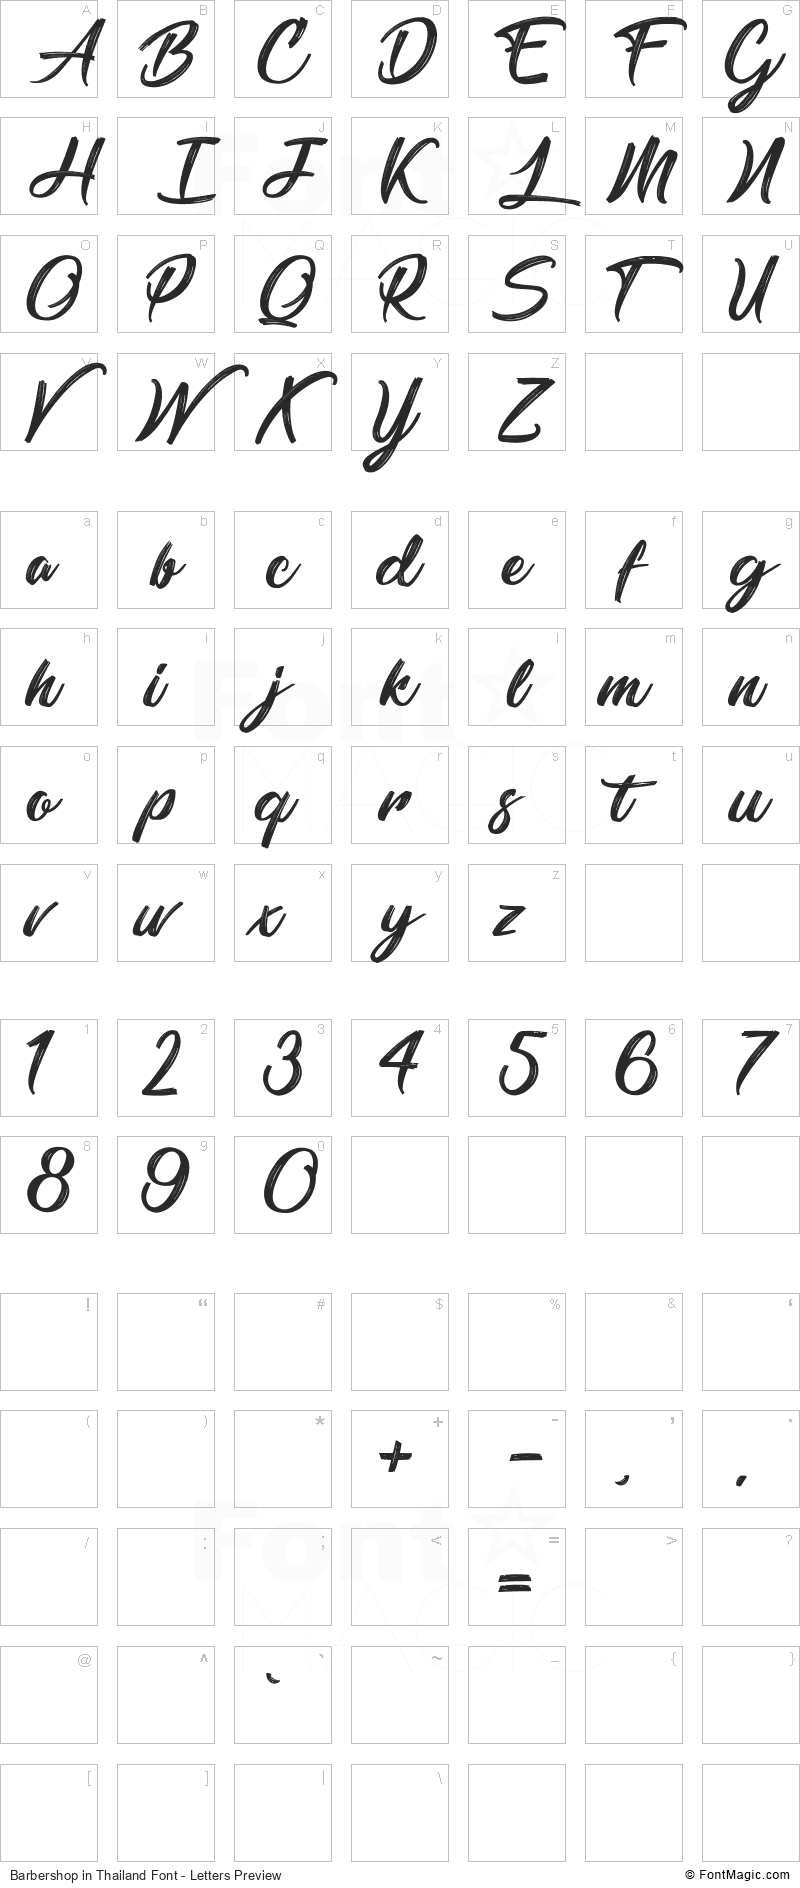 Barbershop in Thailand Font - All Latters Preview Chart